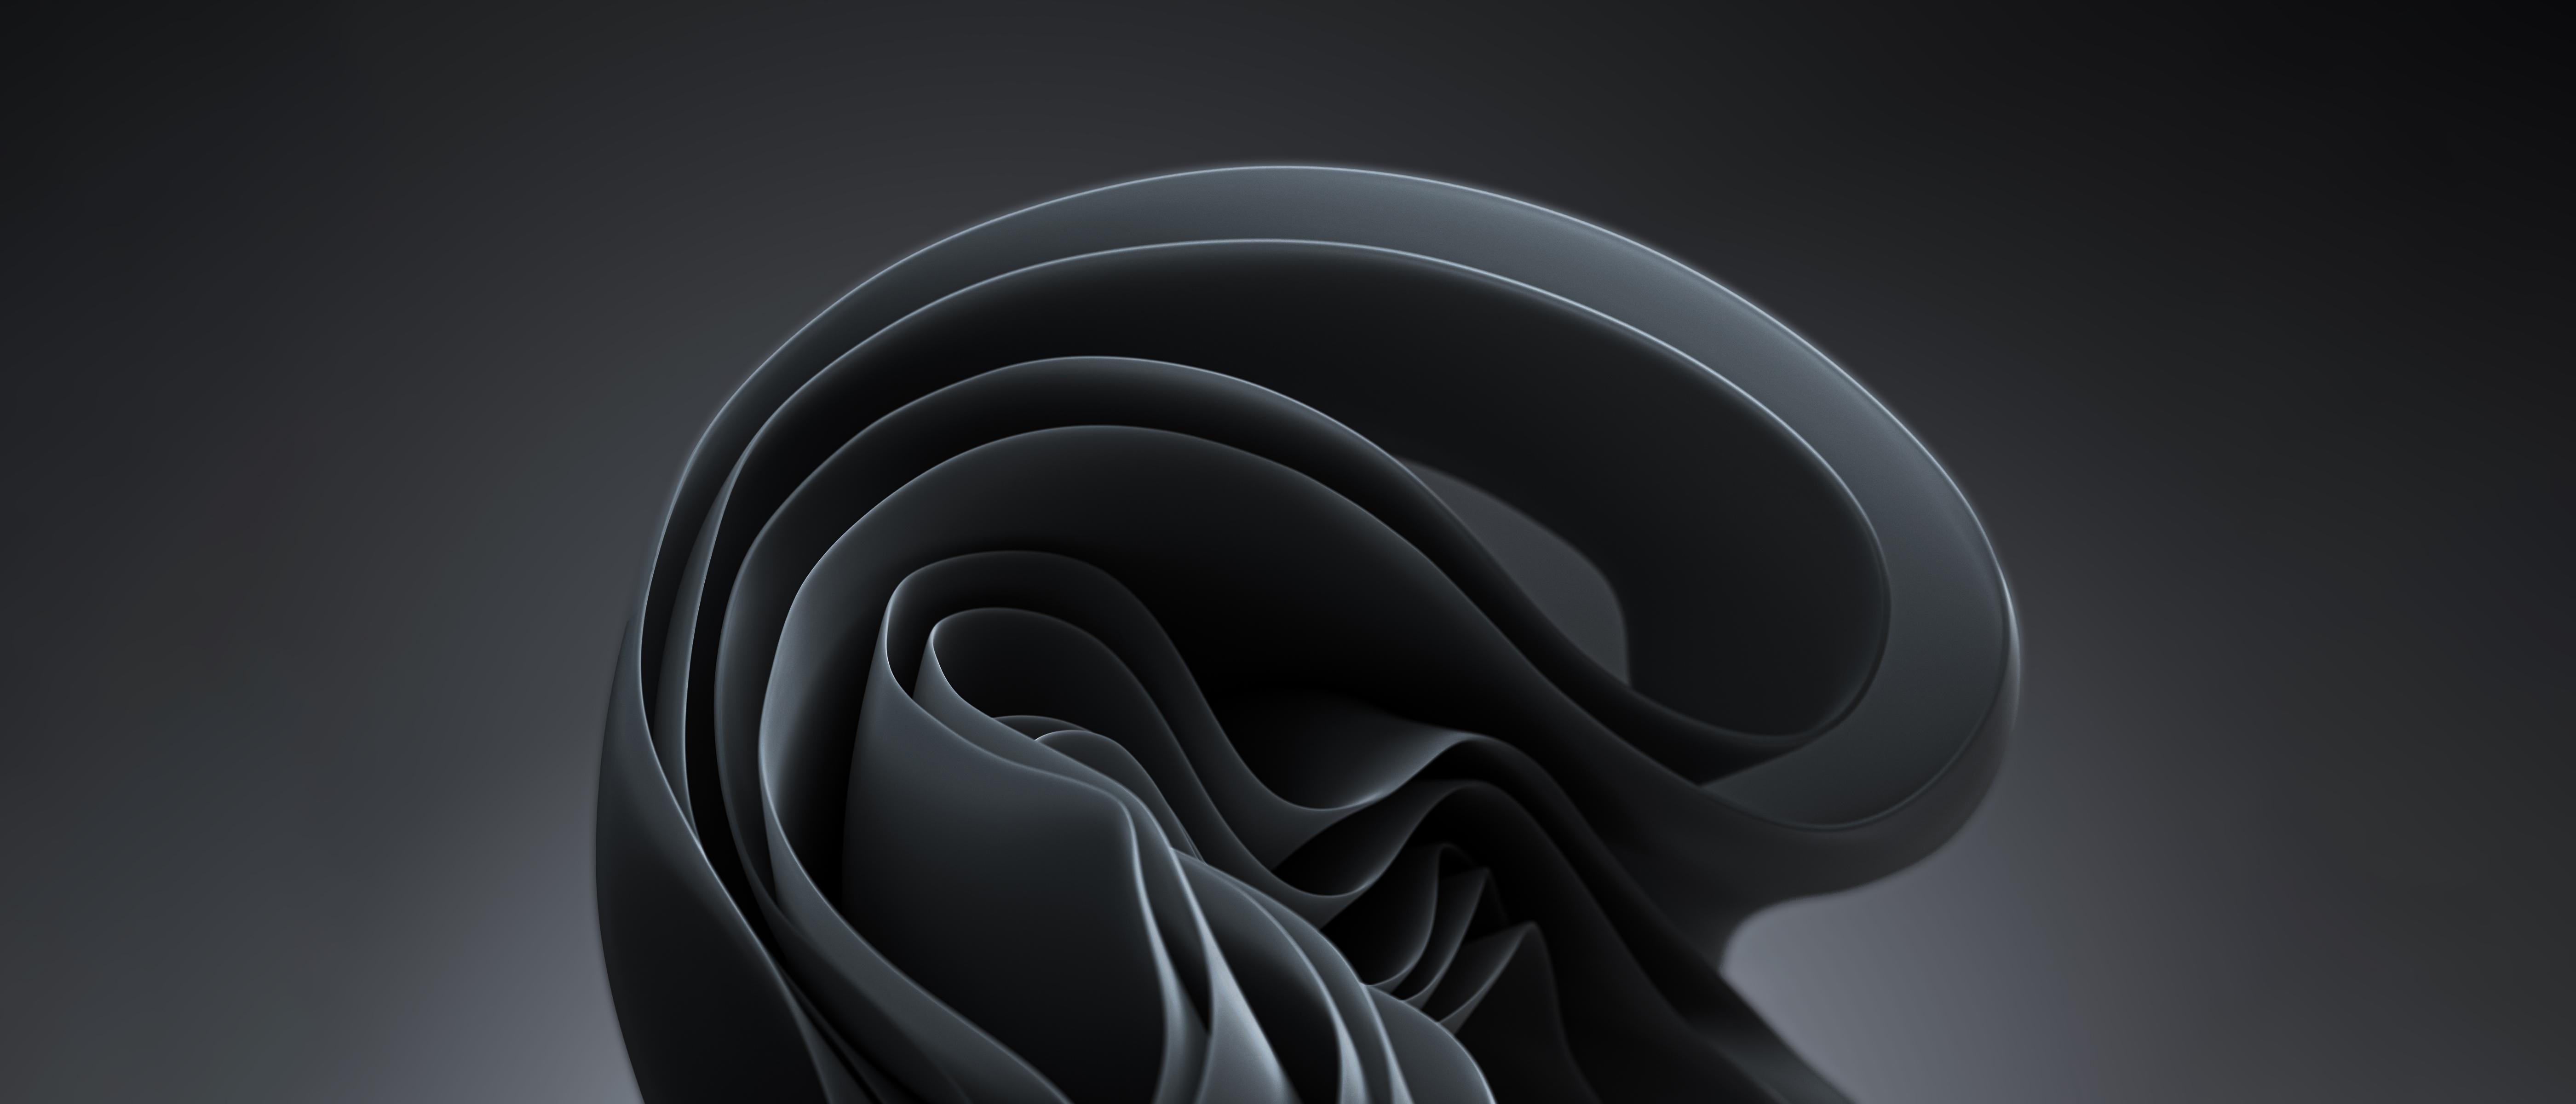 Free download Made a DARK MODE from Windows Wallpaper 5600x2400 r [5600x2400] for your Desktop